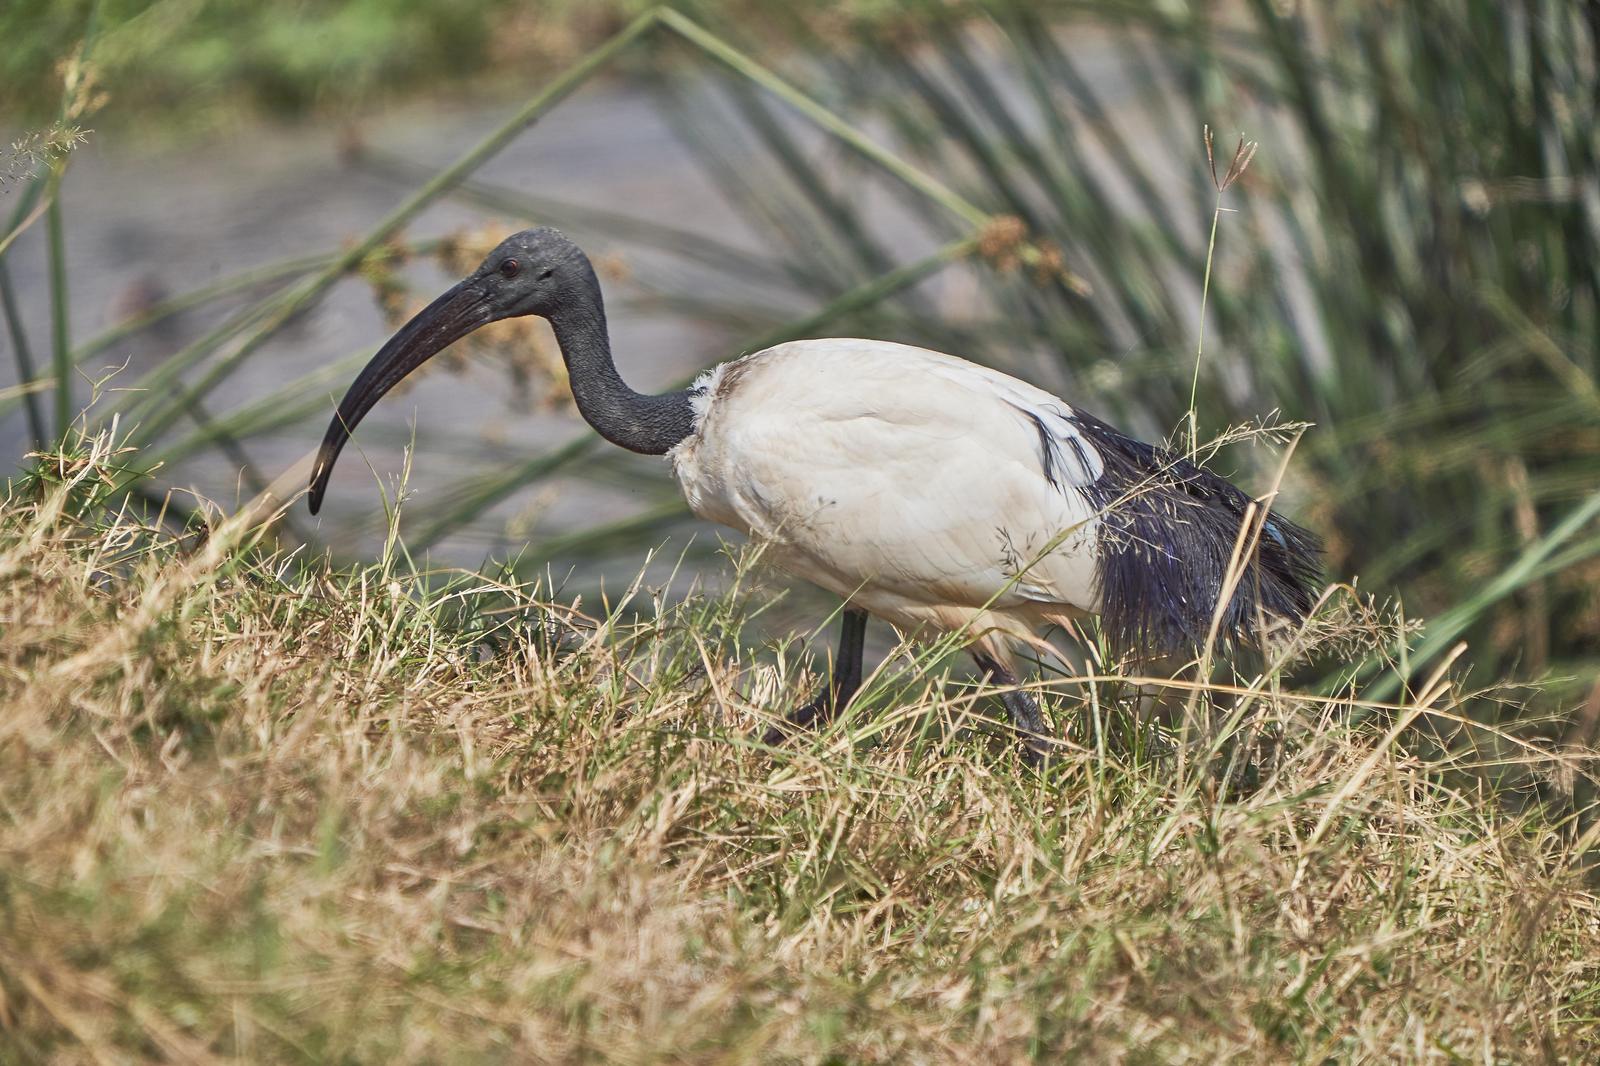 African Sacred Ibis Photo by Steven Cheong